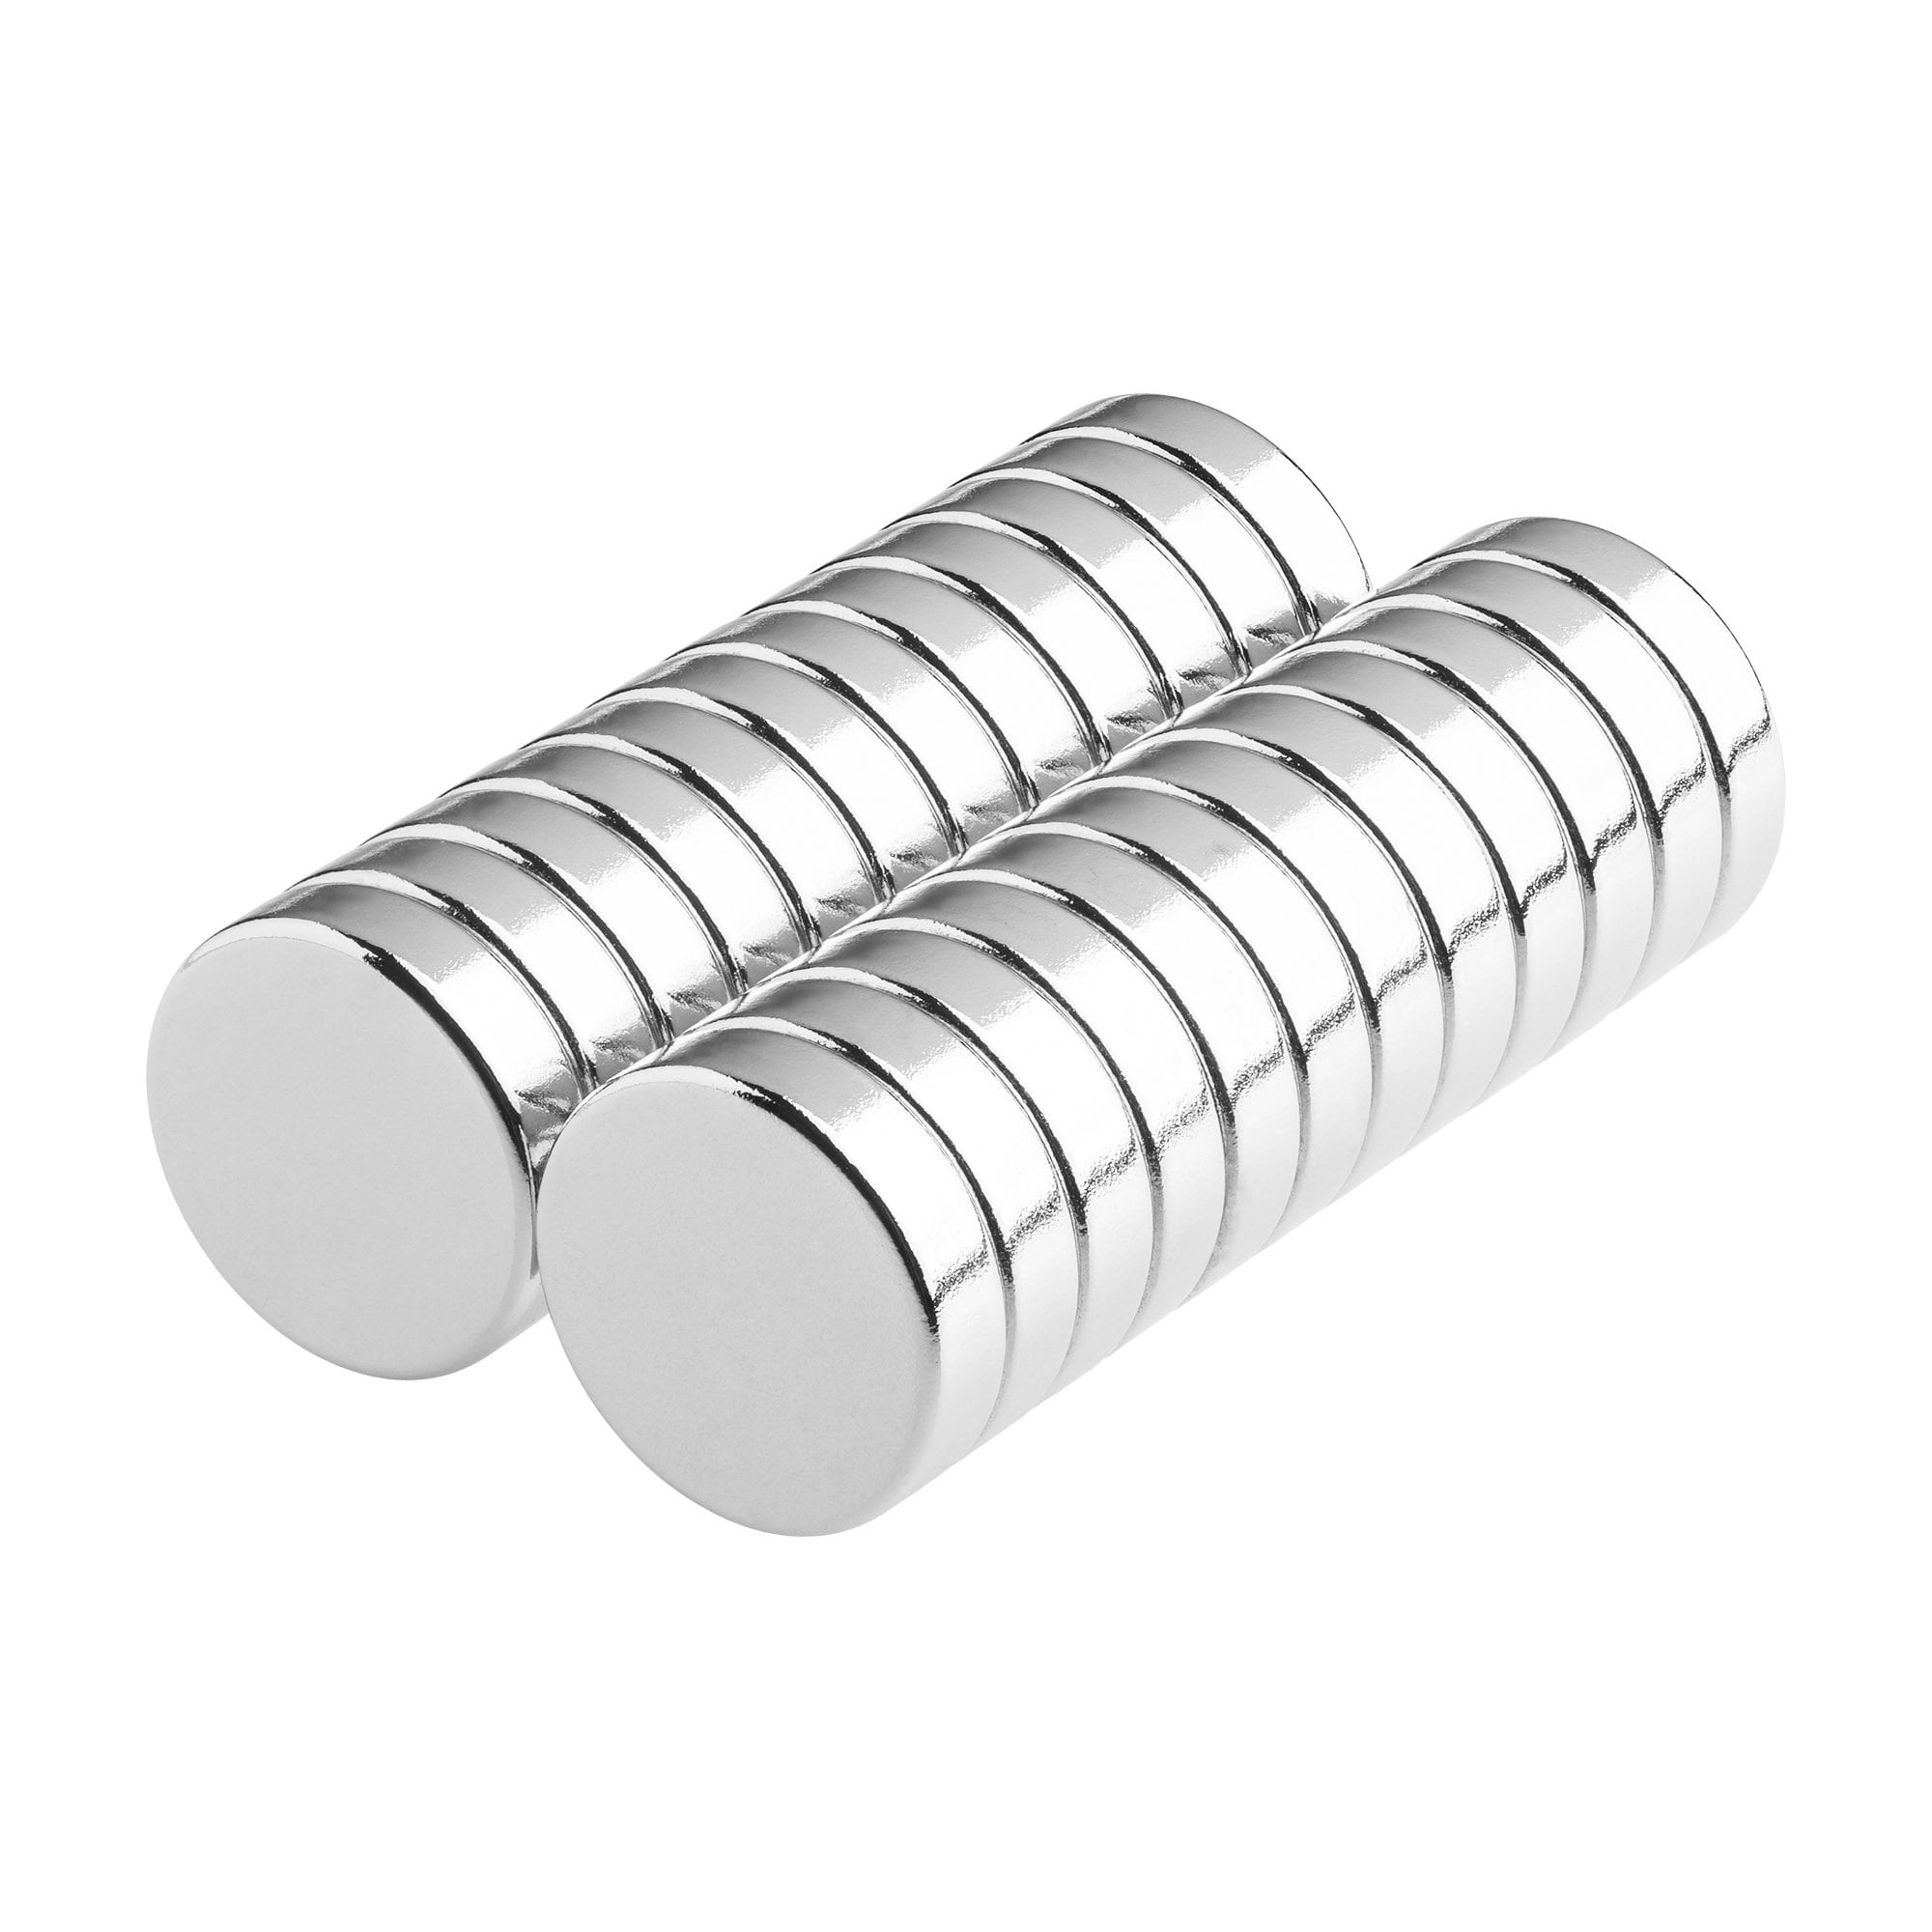 6 mm x 3 mm 1/4in x 1/8in N52 Small Strong Disc Rare Earth Neodymium Magnet 